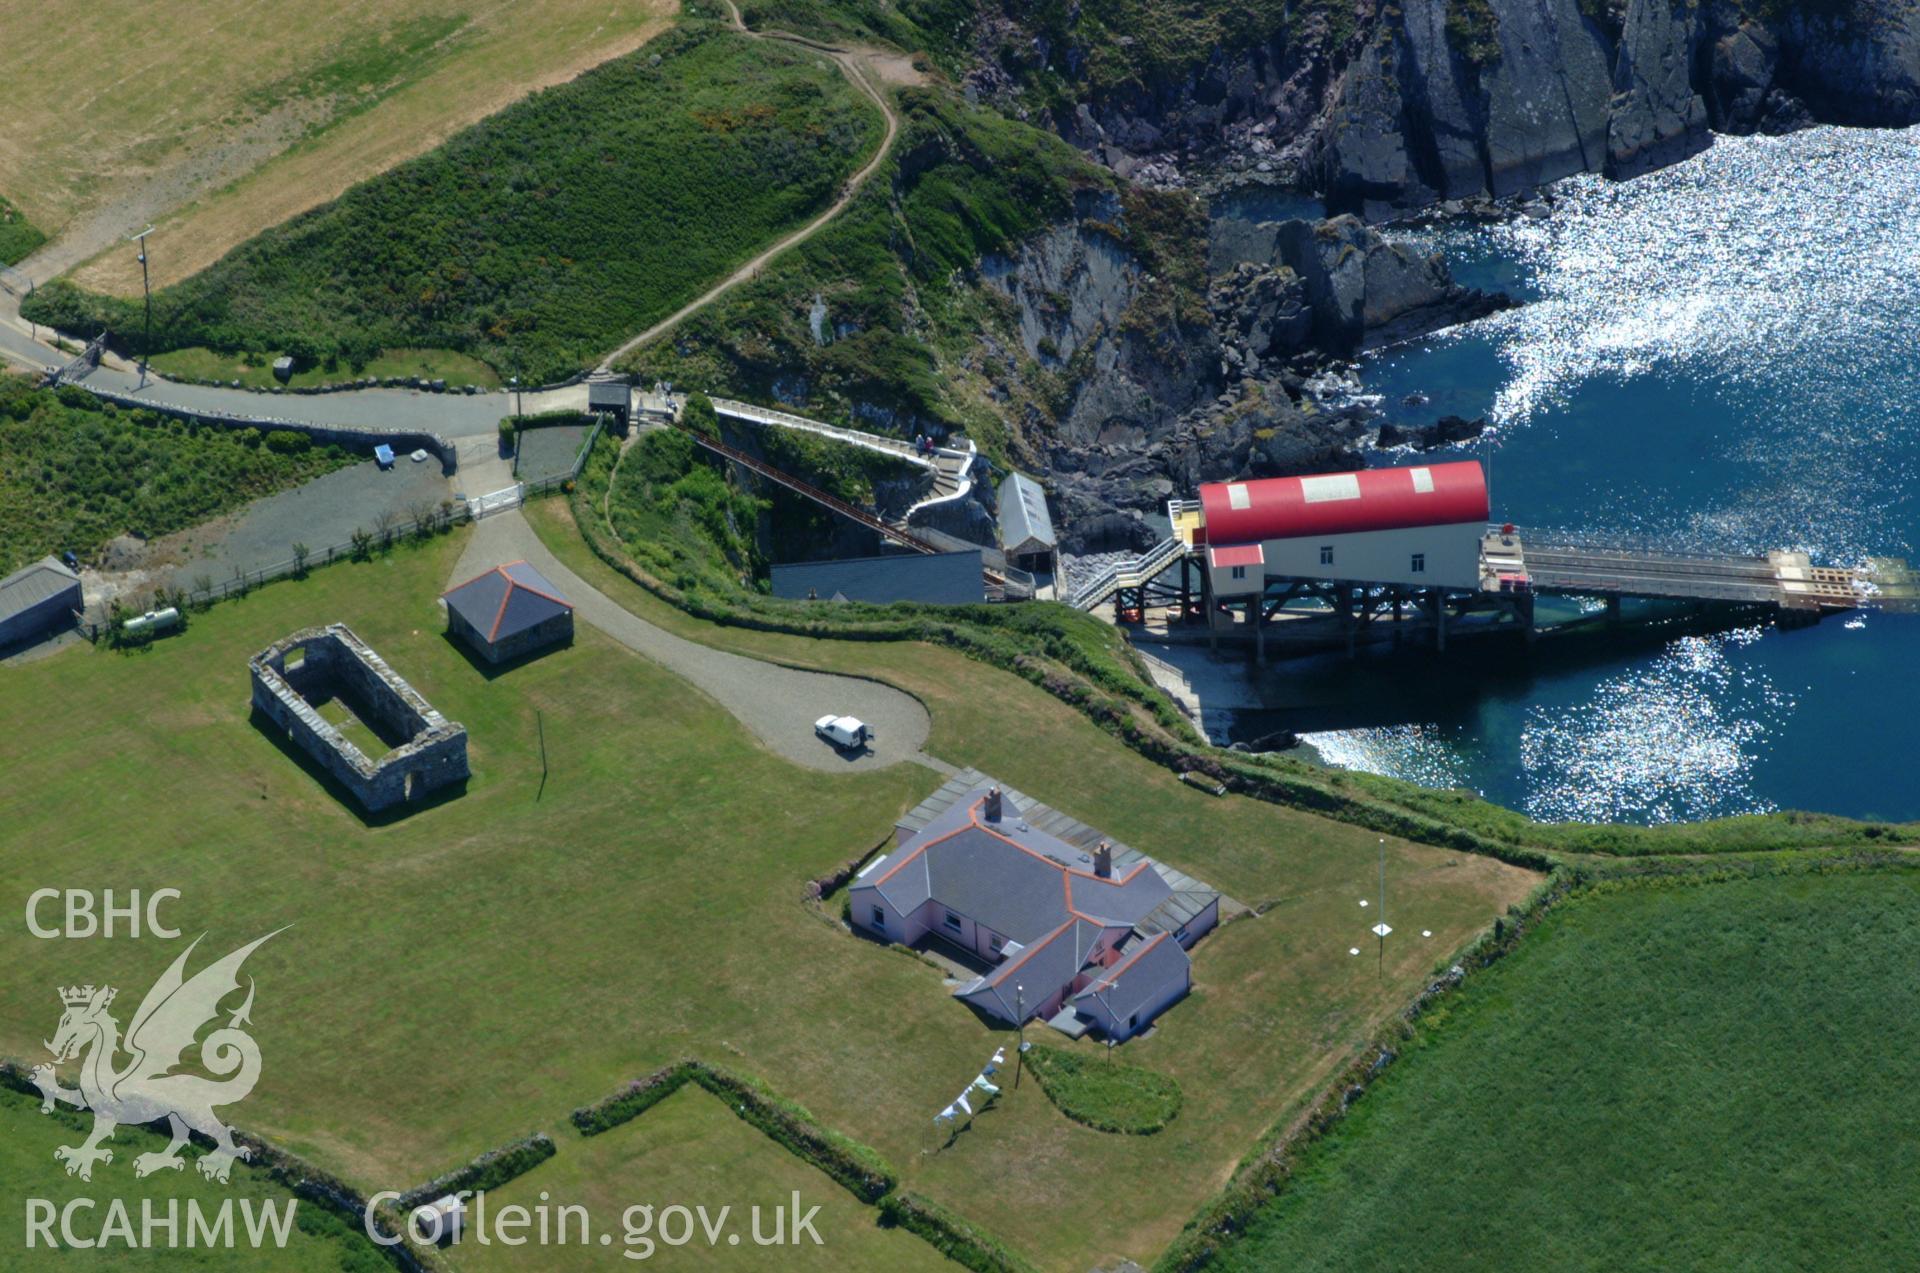 RCAHMW colour oblique aerial photograph of the lifeboat station at St Davids taken on 25/05/2004 by Toby Driver